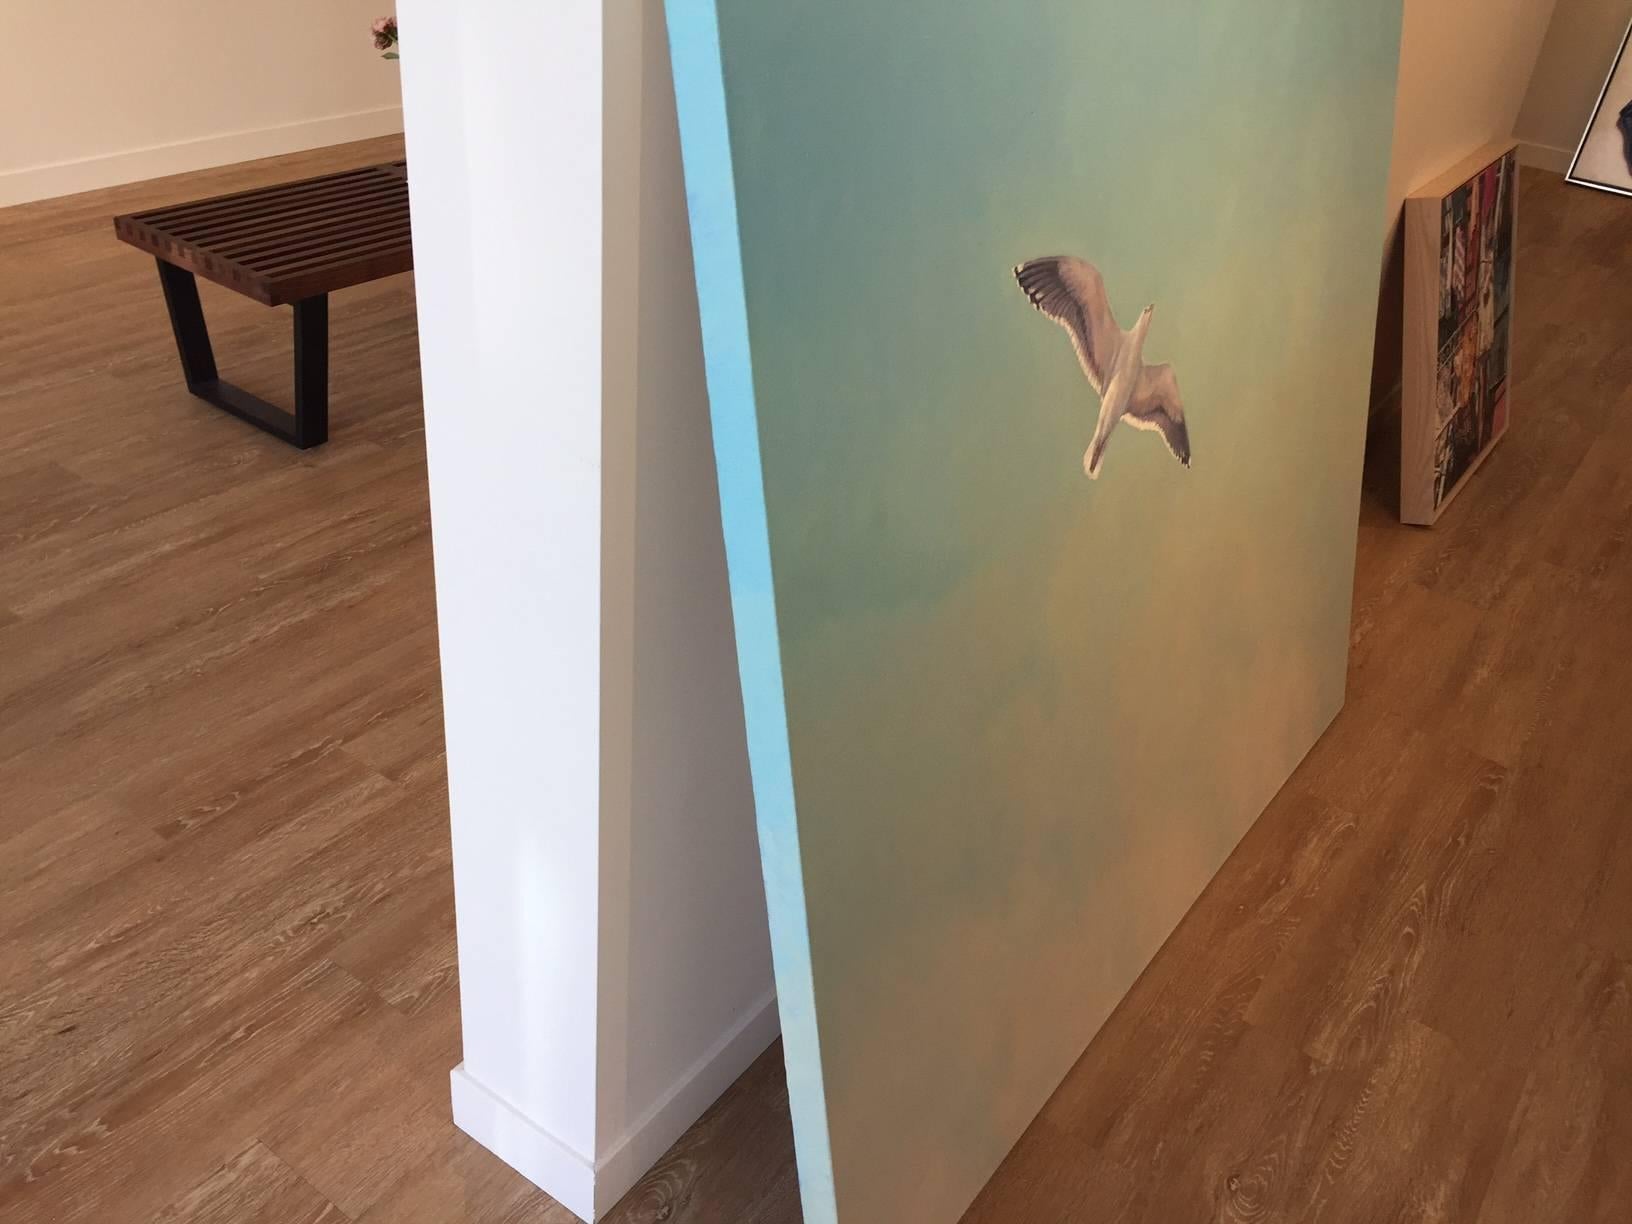 Peaceful soaring seagull - The Gull - flies overhead capturing both nature and air in this  skyscape from Willard Dixon, who is one of the finest American contemporary realist painters living today. Dixon has painted coastal landscapes for 35 years,